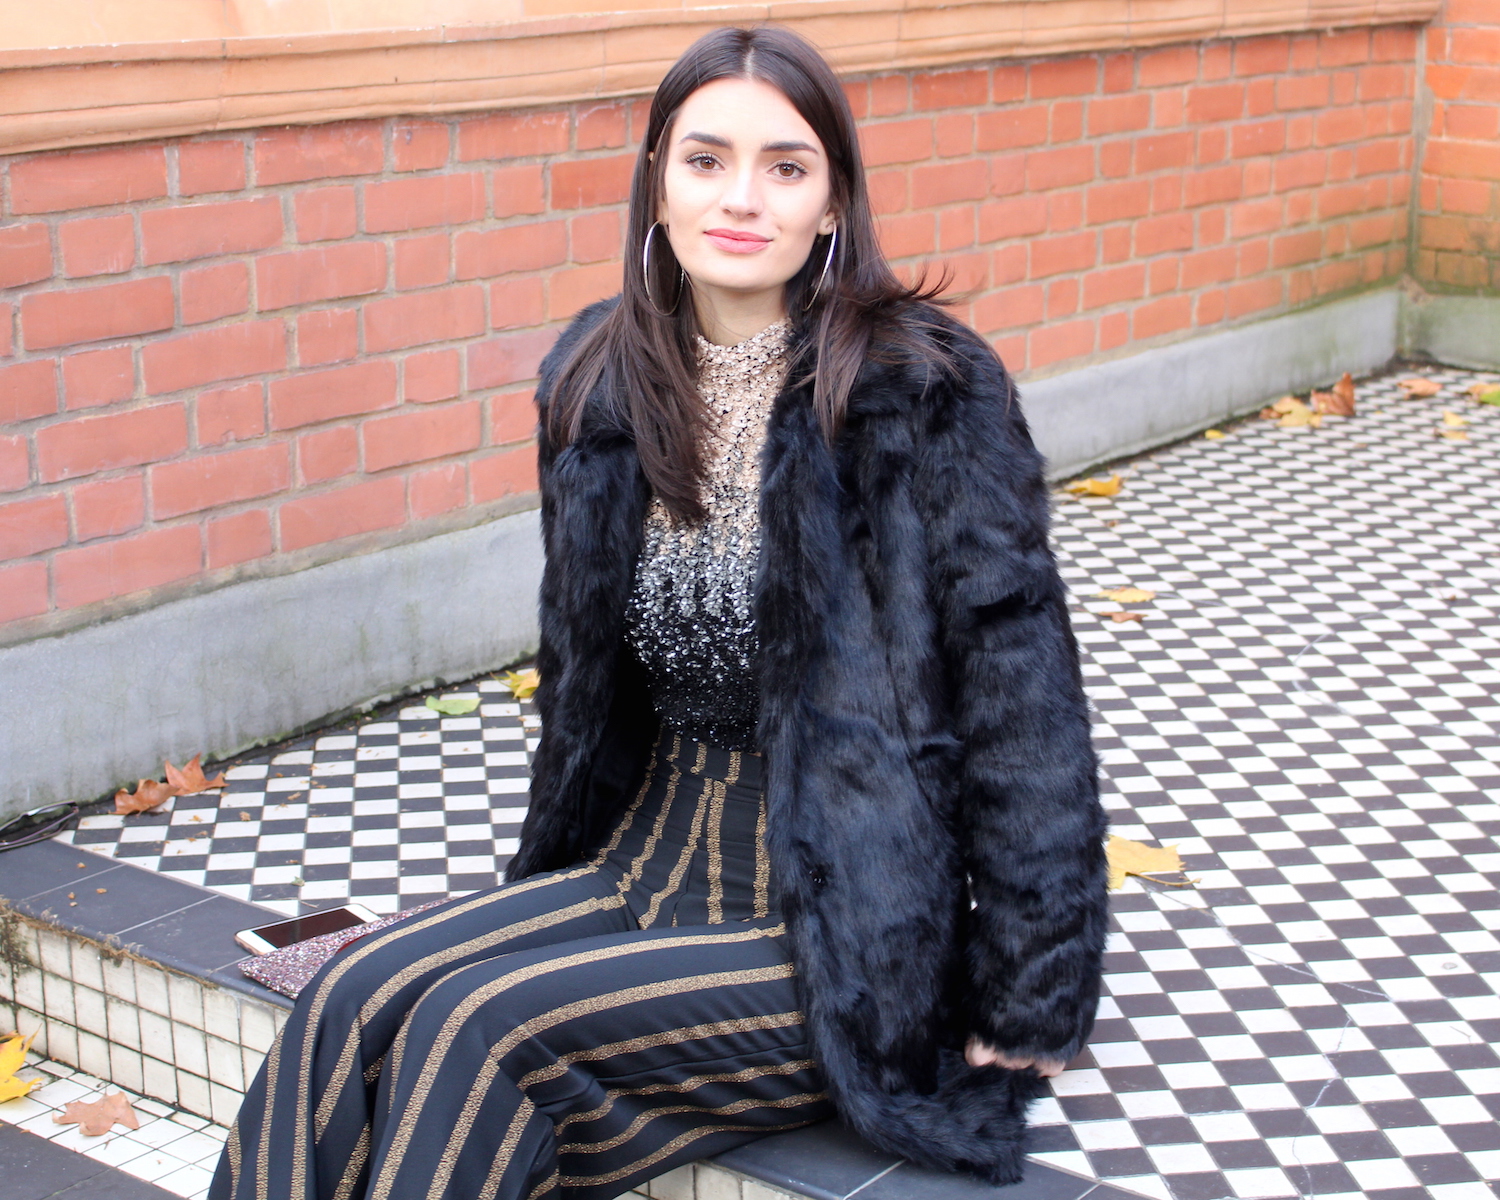 peexo fashion blogger wearing sequins and faux fur